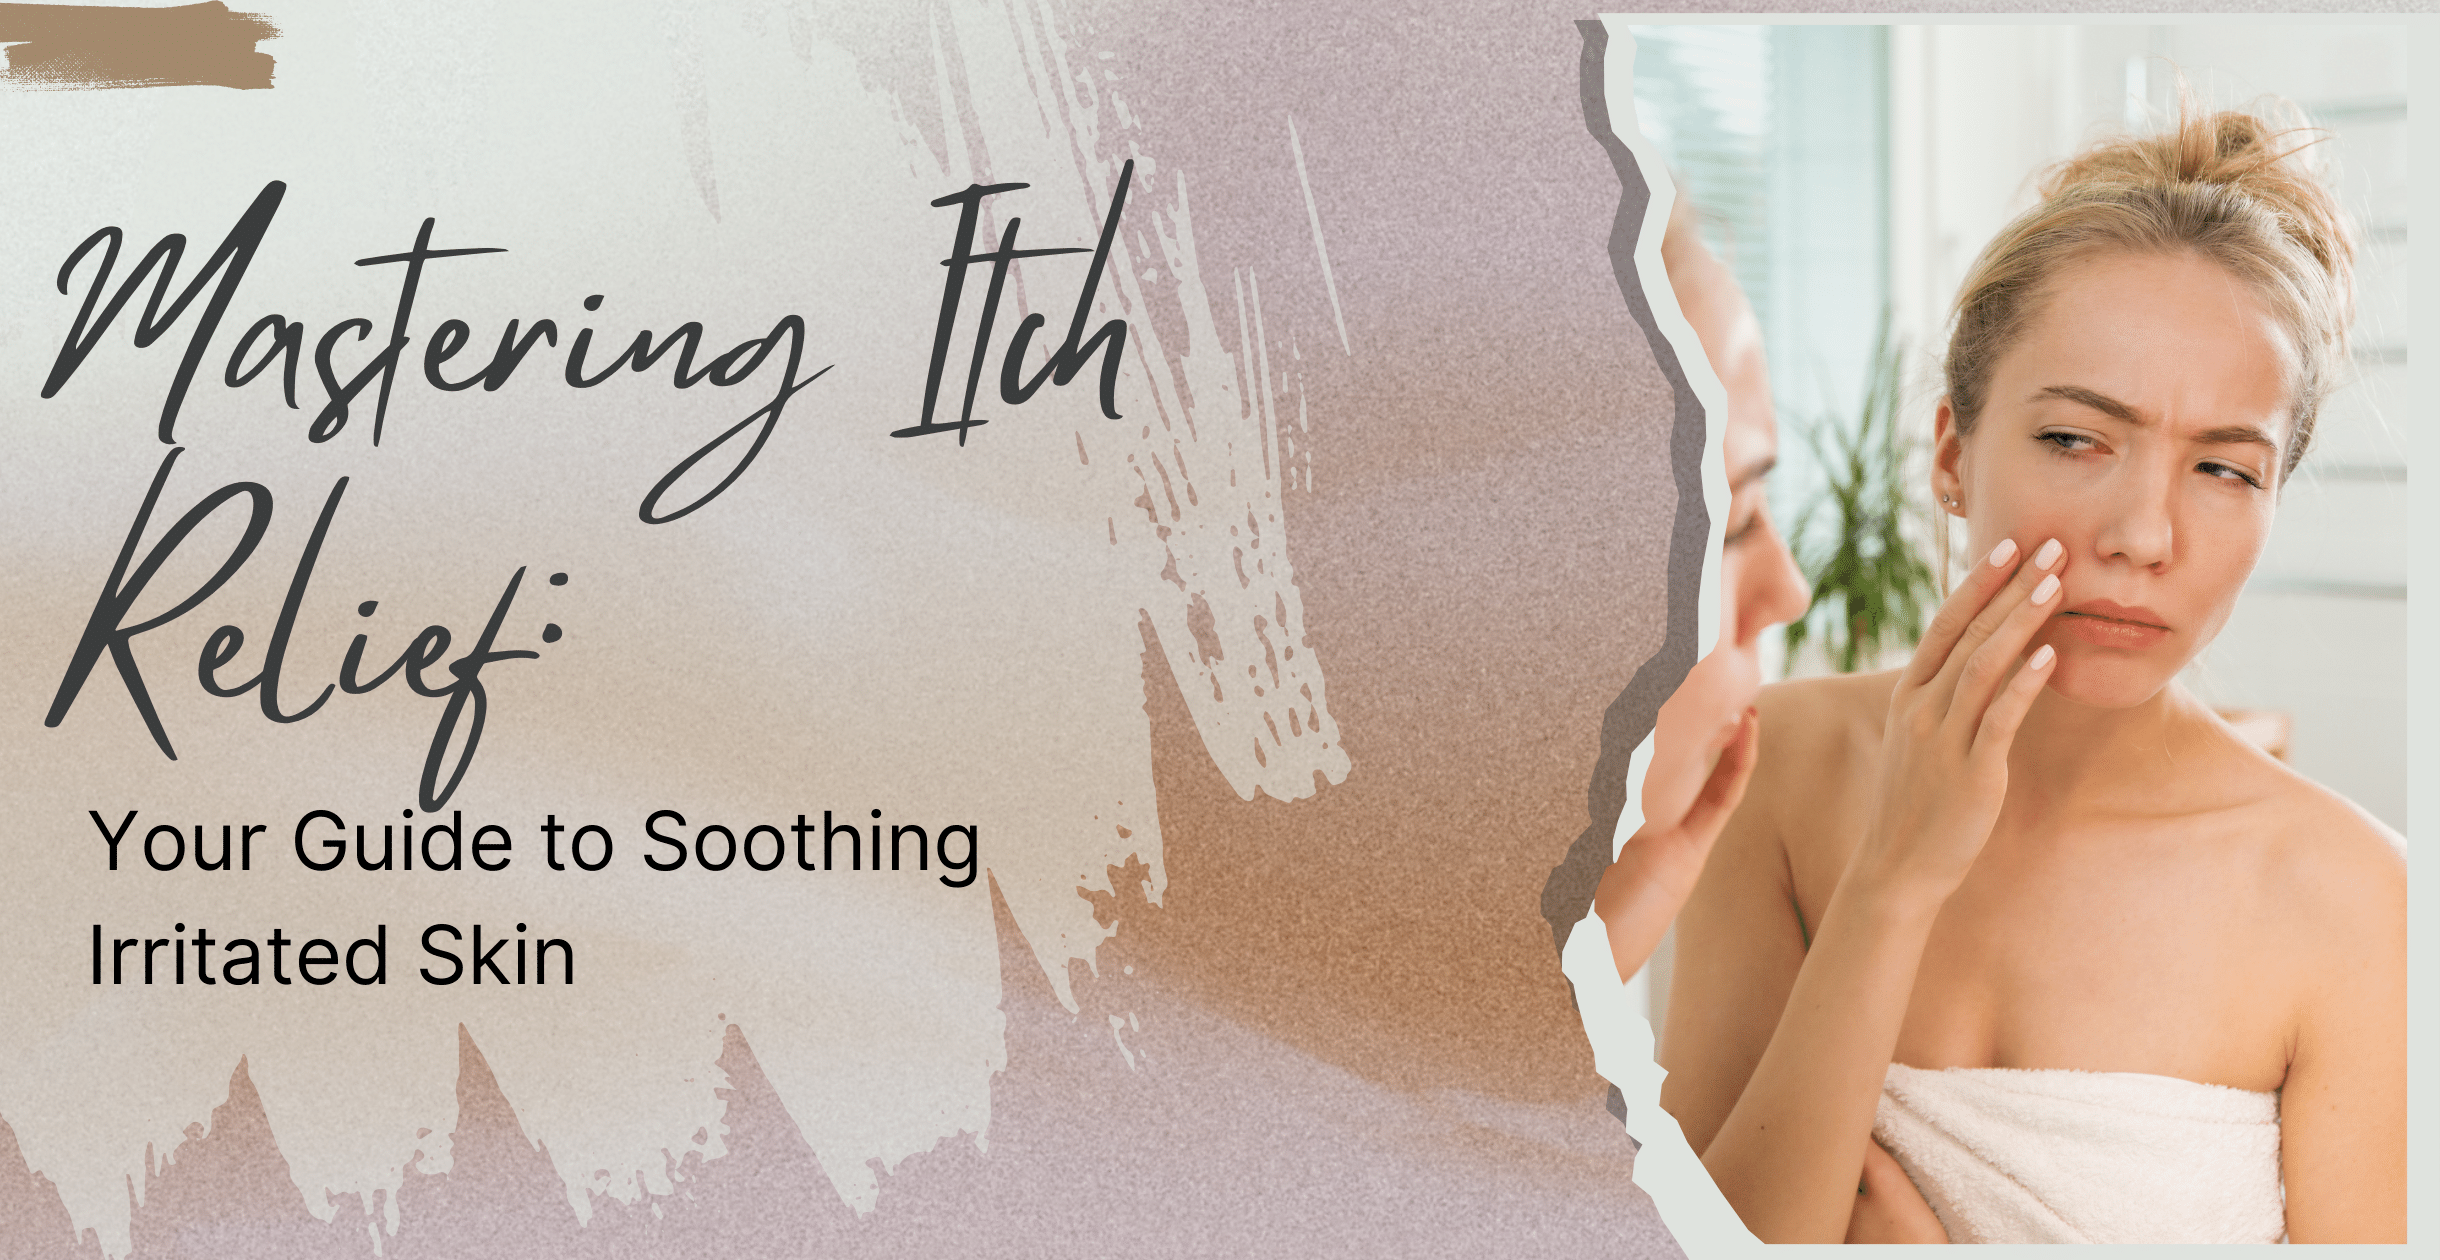 Mastering Itch Relief: Your Guide to Soothing Irritated Skin